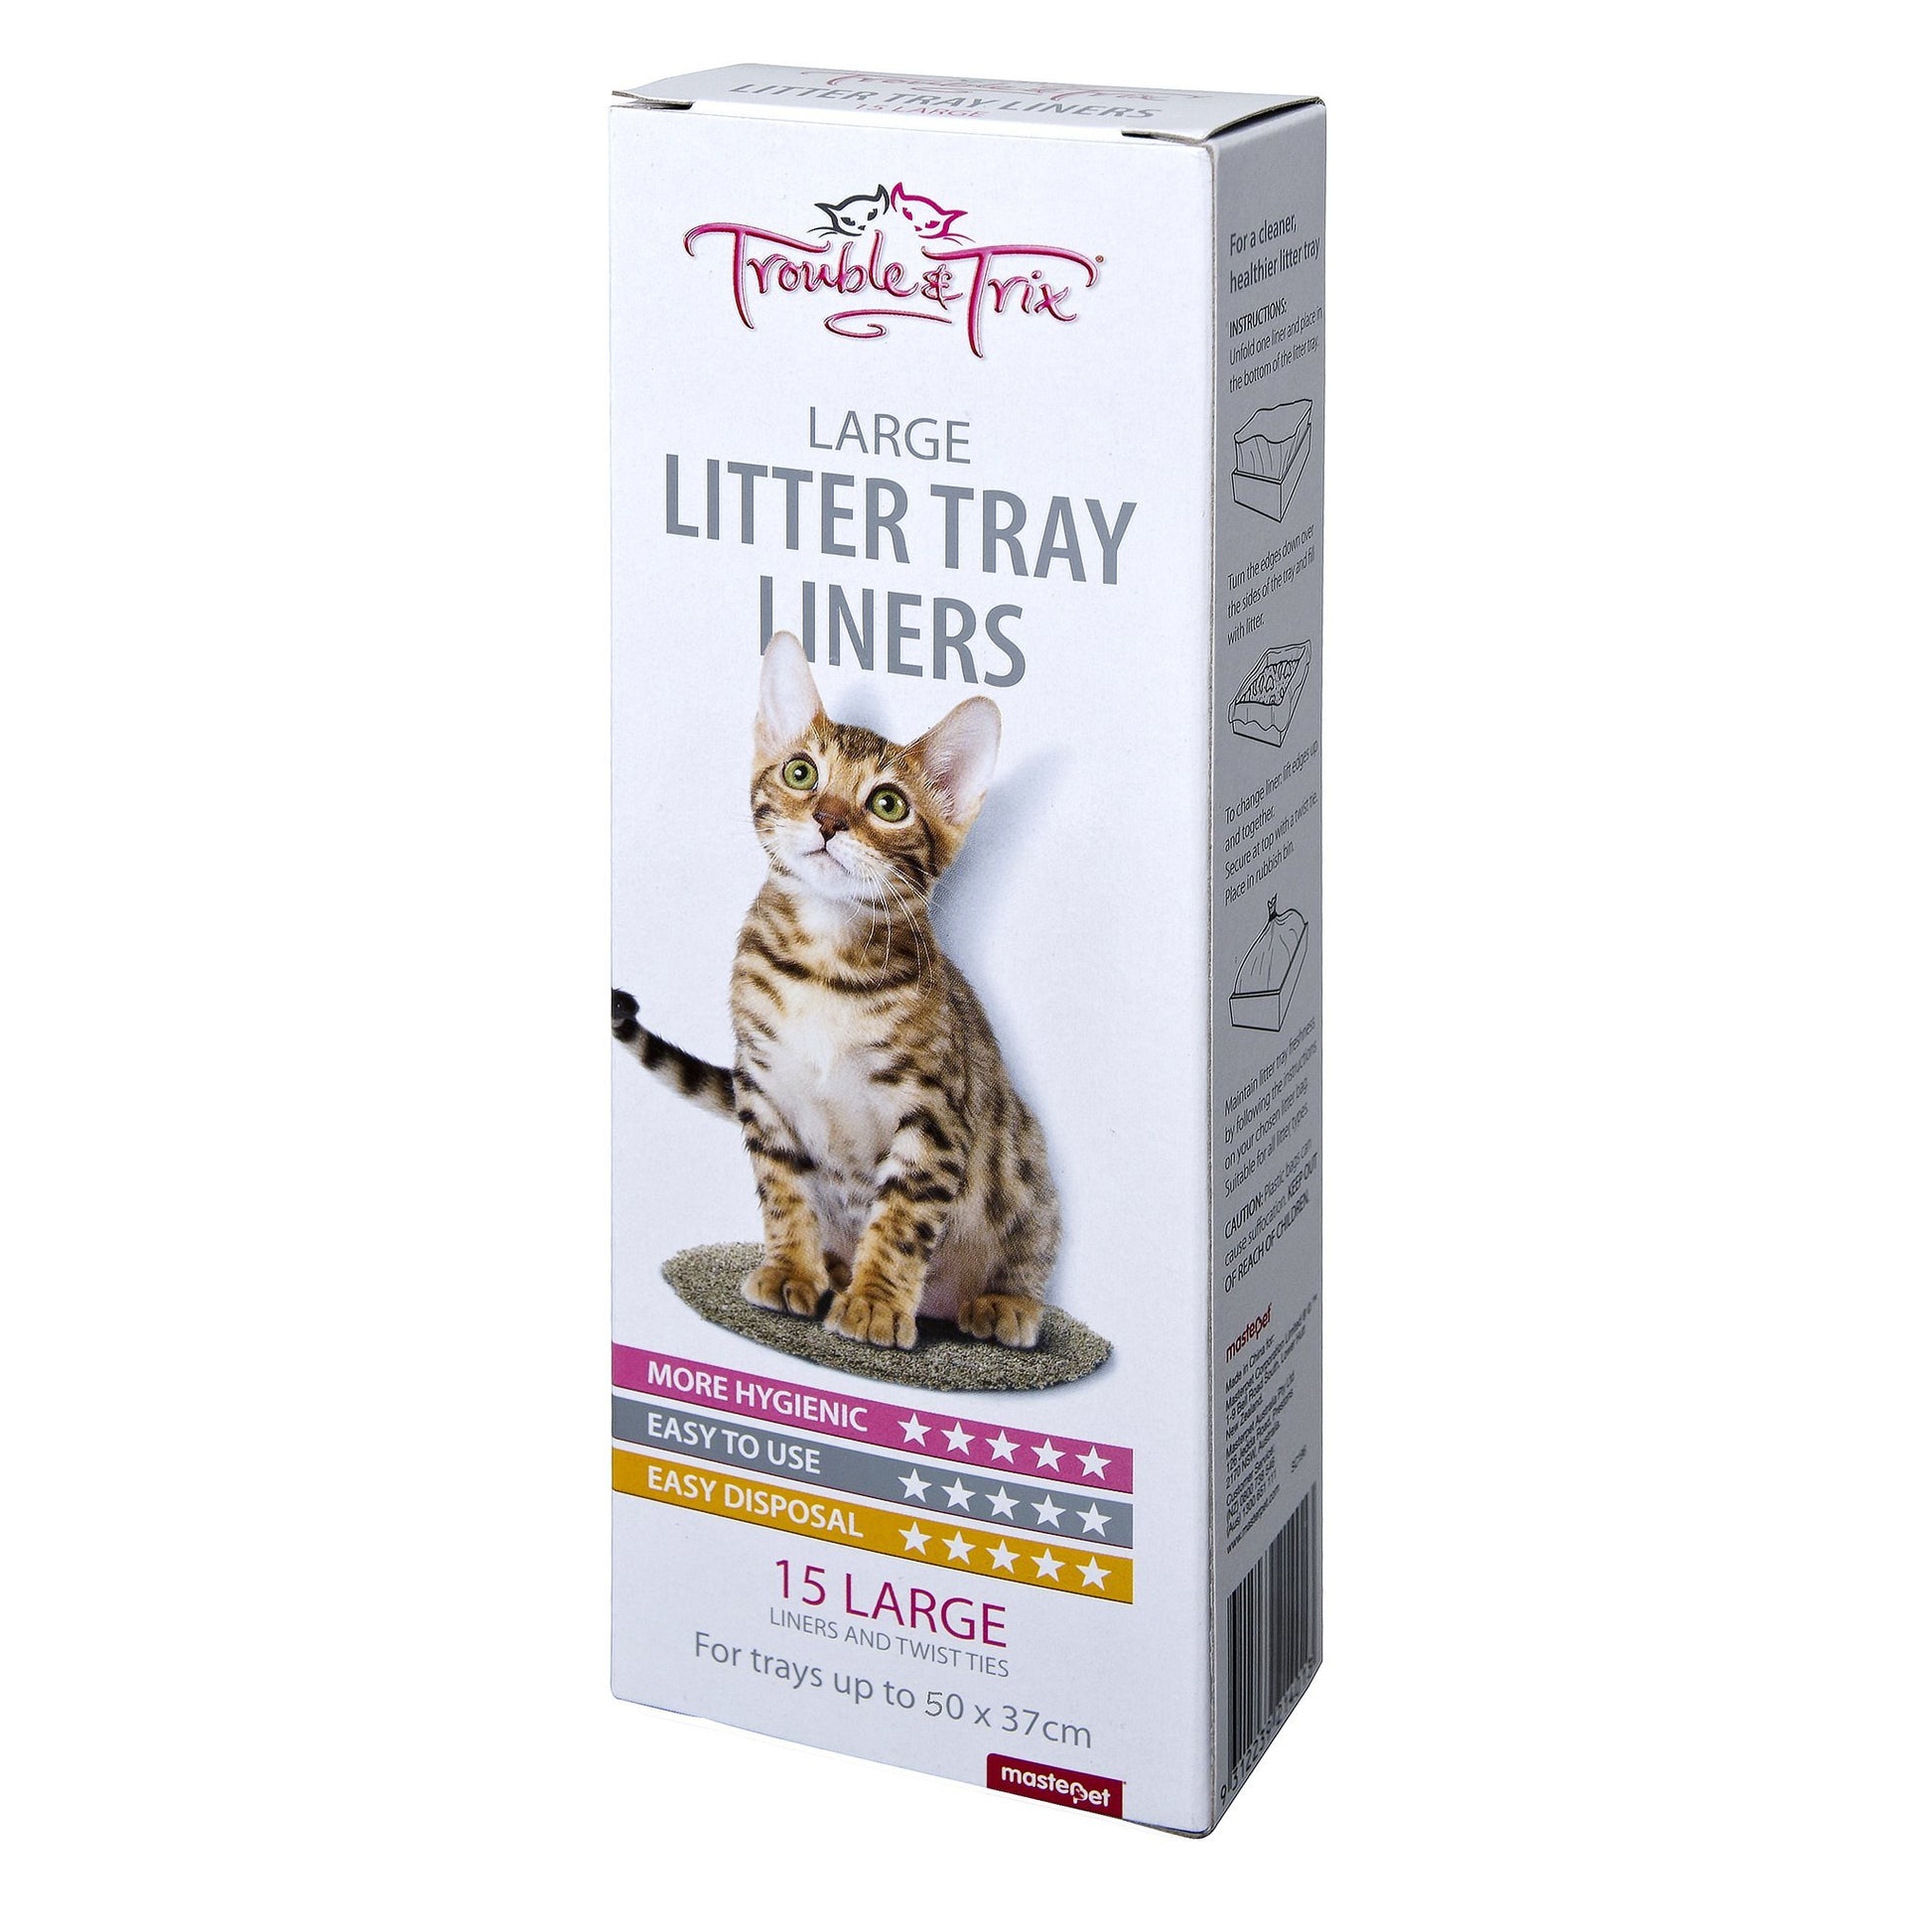 Trouble & Trix Litter Tray Liners Large 15 Pack - Woonona Petfood & Produce